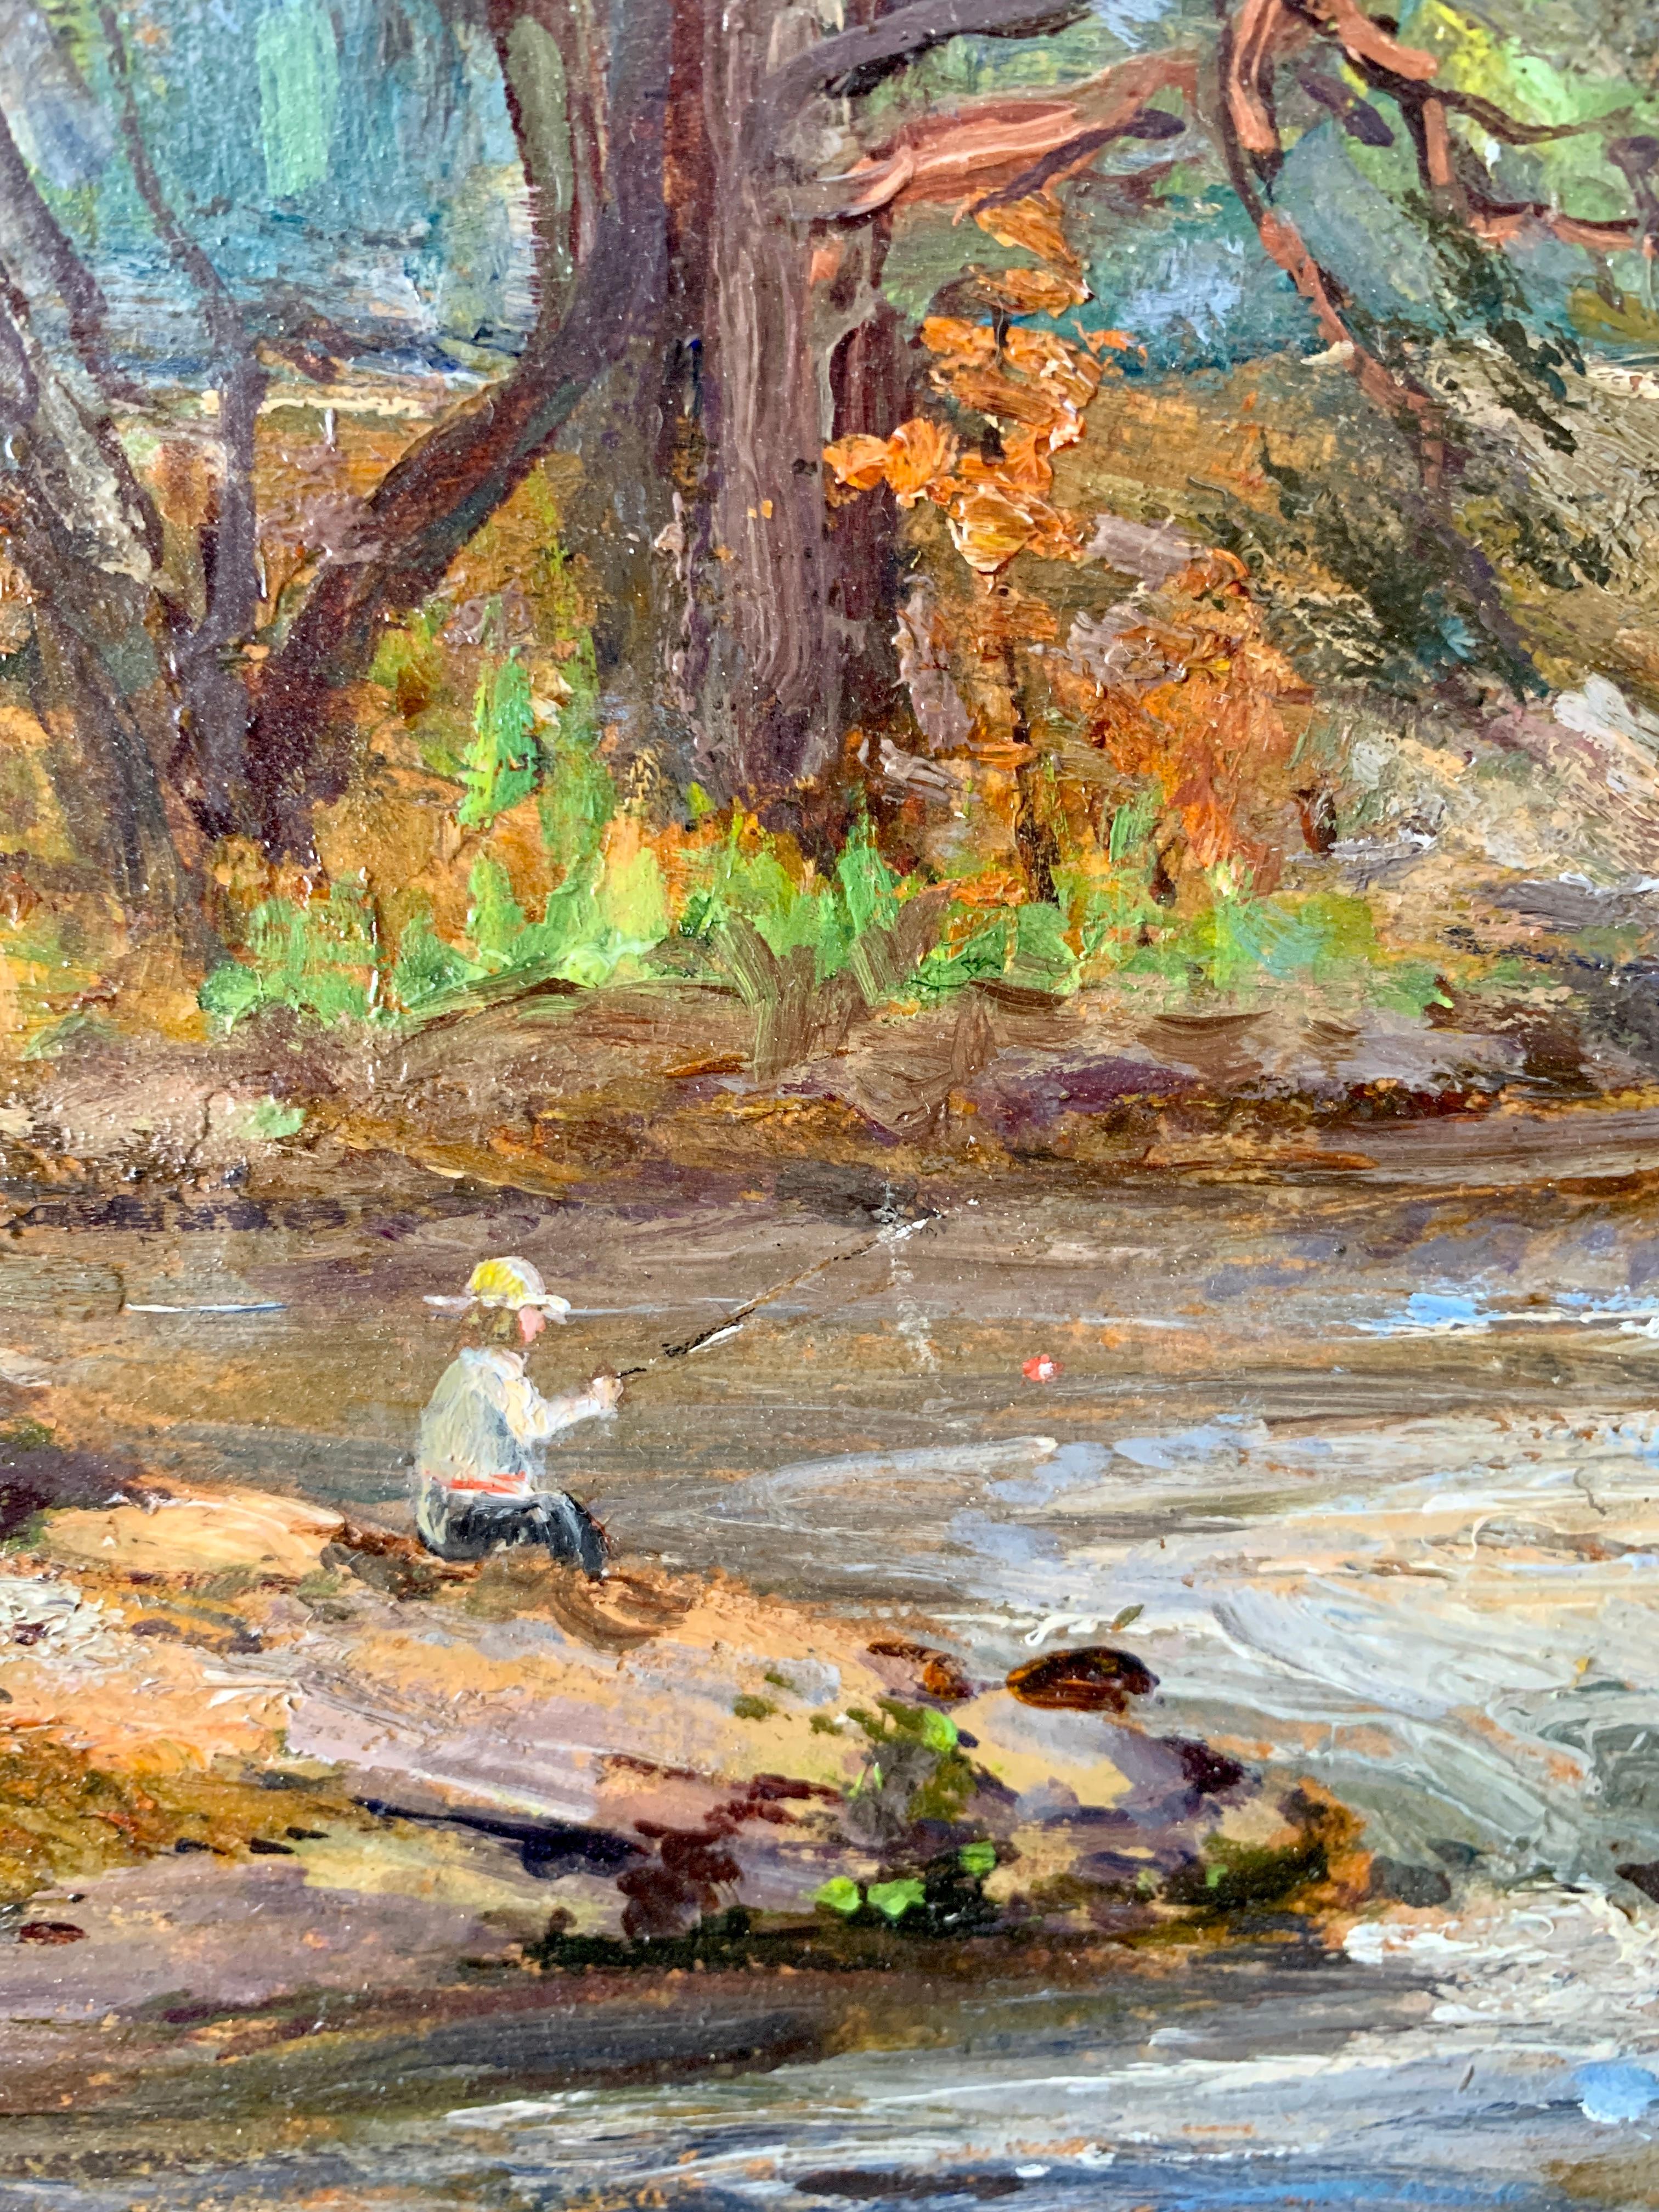 English Early 20th Century impressionist, man fishing by river landscape  - Impressionist Painting by Ernest Walbourn